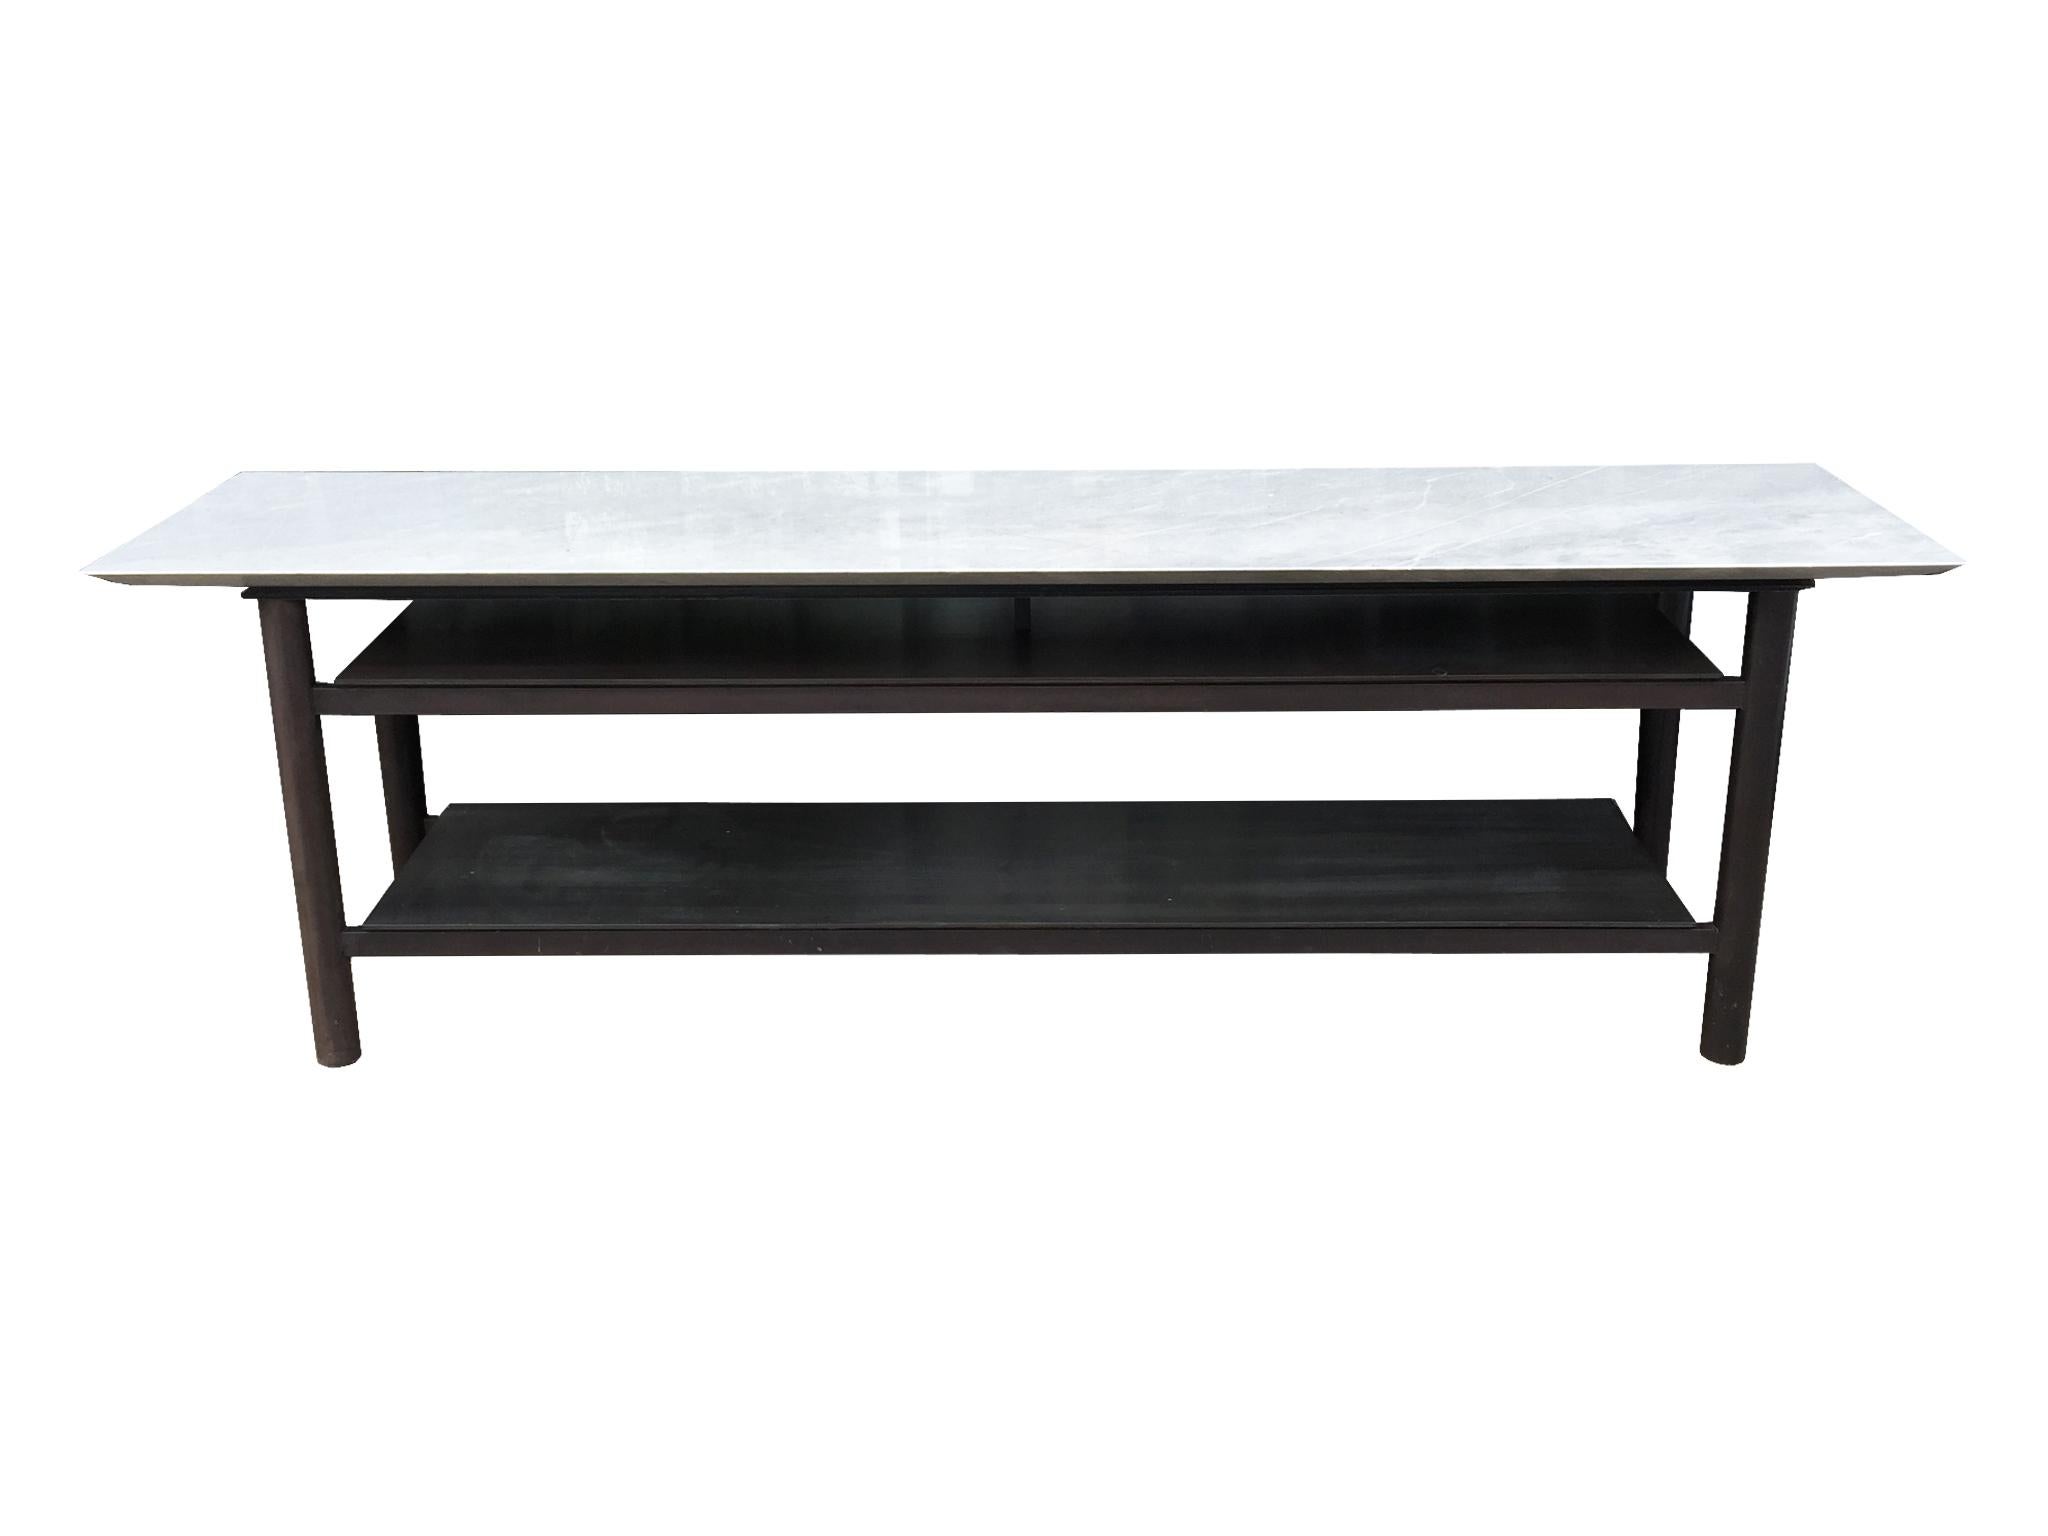 This exceptional sofa table is custom made. It's comprised of a steel base and white marble tabletop. Cut with clean, smooth lines, the table is a substantial piece of furniture, an ideal stably grounded surface that can be placed behind a sofa or